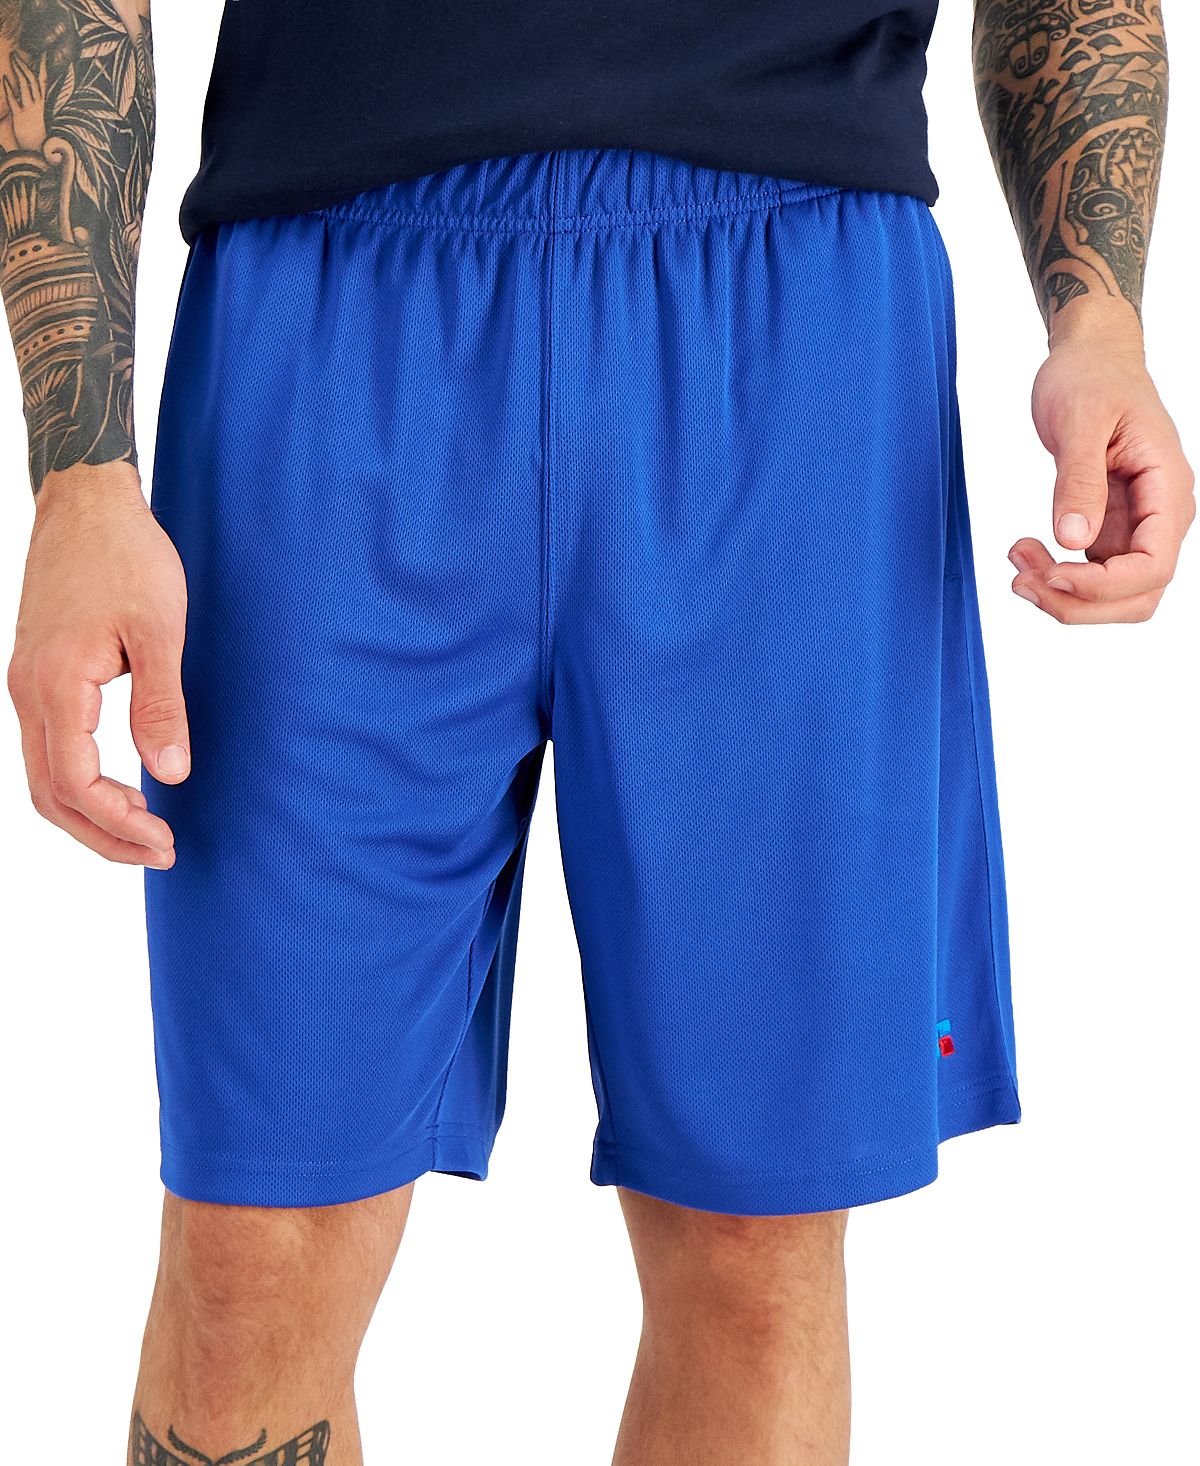 Russell Athletic Mesh Performance 9" Shorts Royal Blue